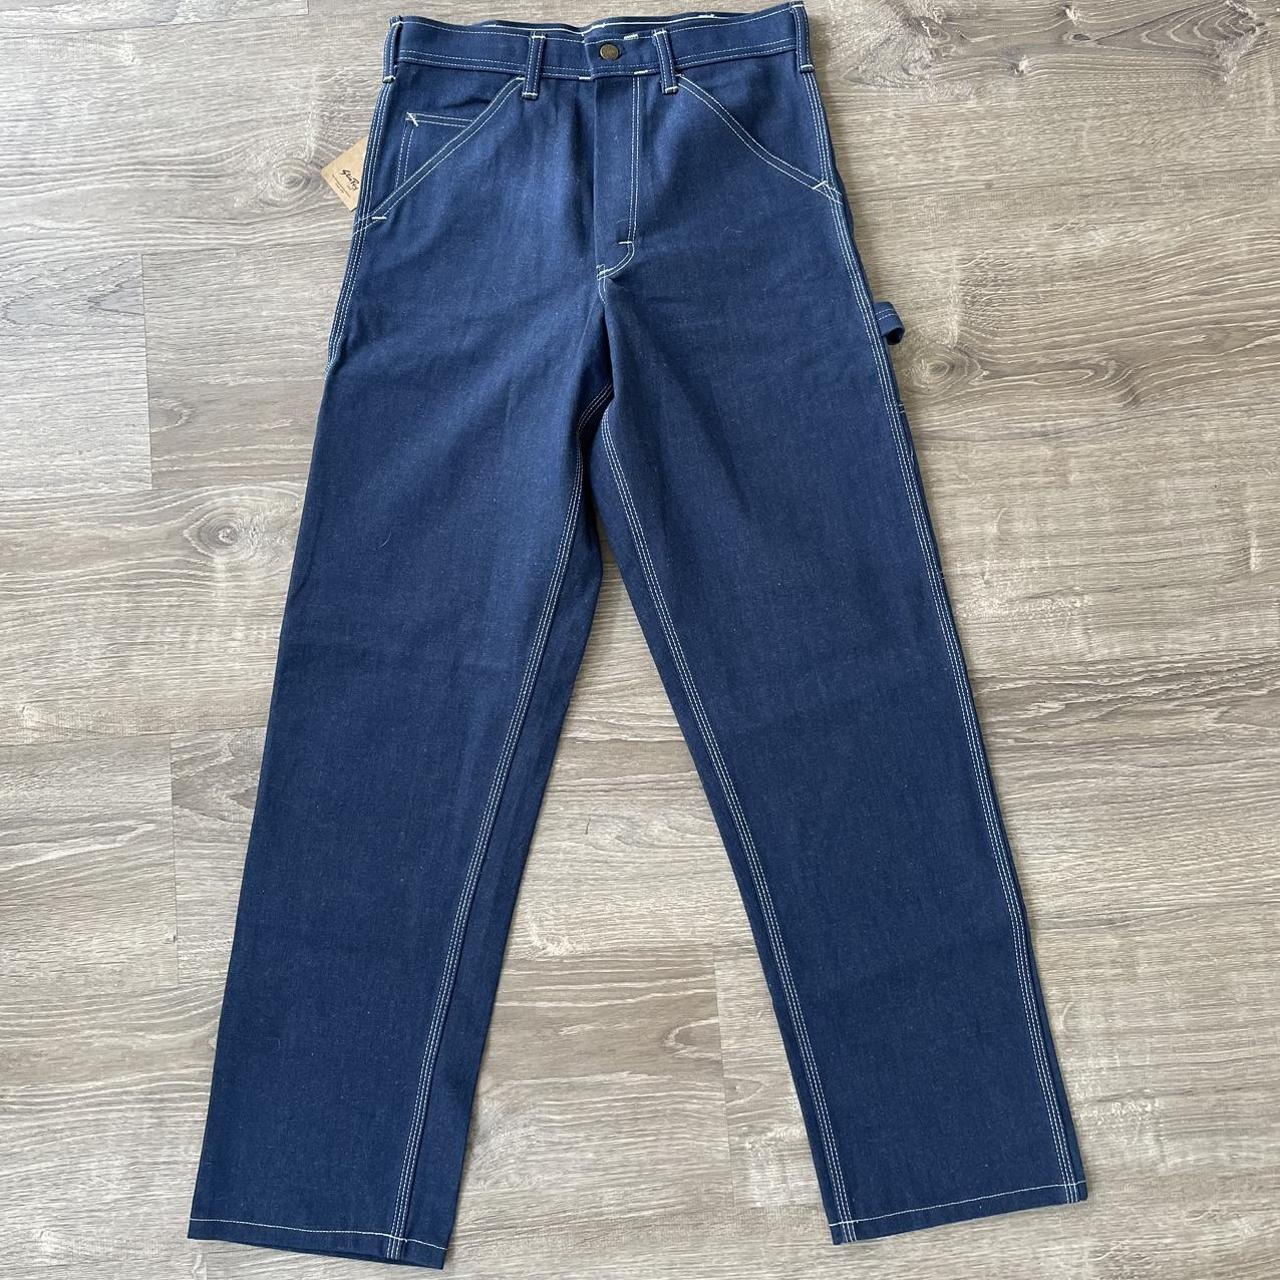 Stan Ray Jeans - brand new with tags. Waist 29”... - Depop